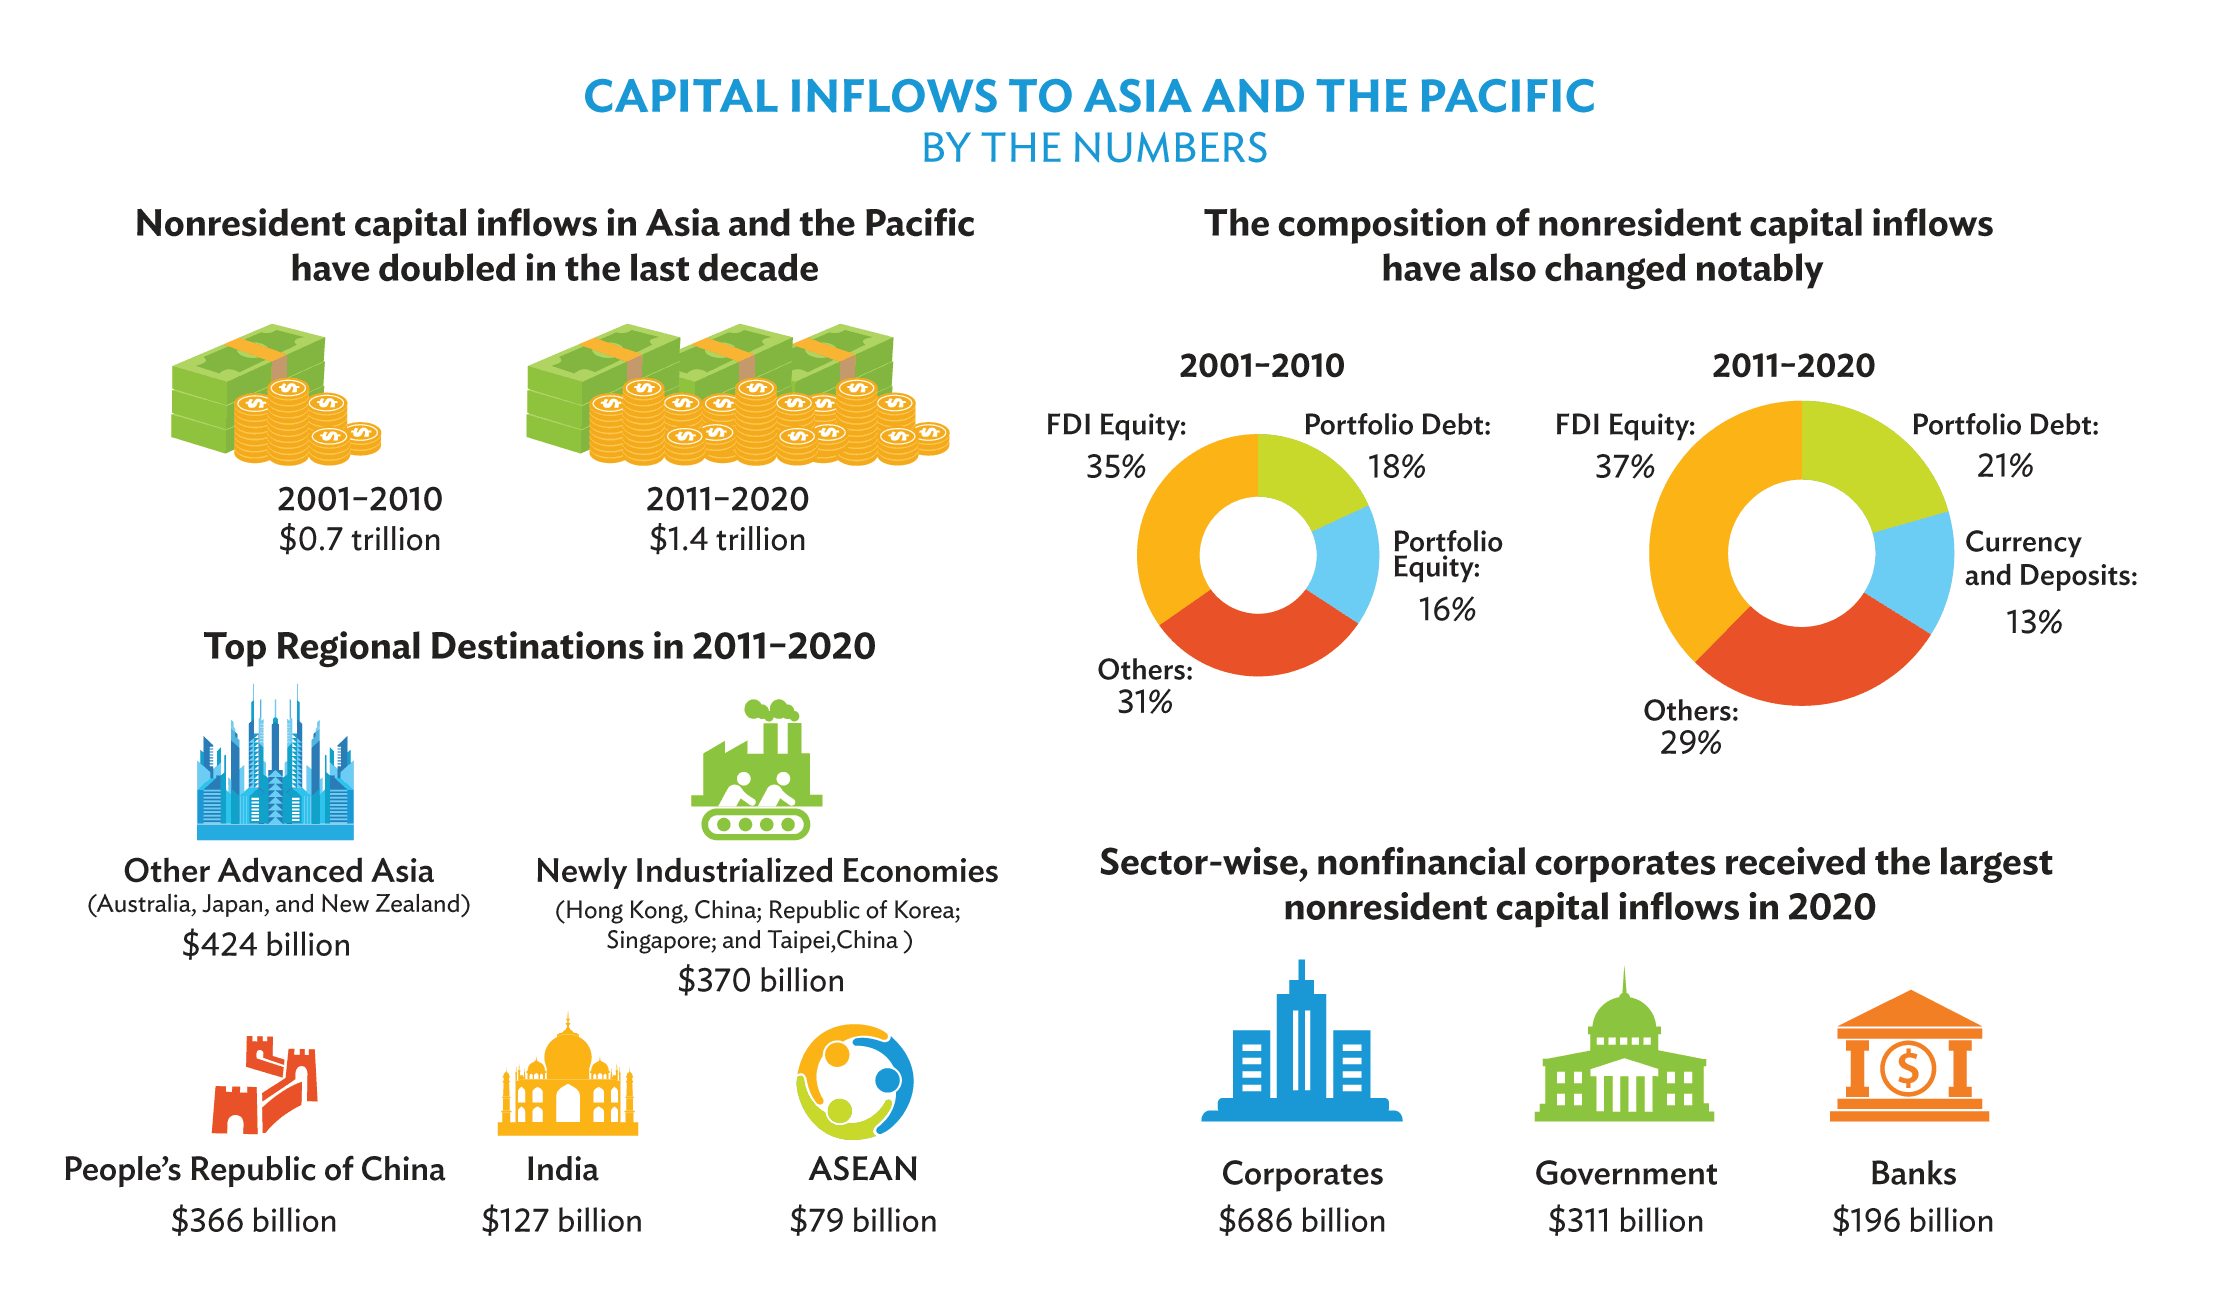 Evolving Patterns of Capital Flows in Asia and the Pacific